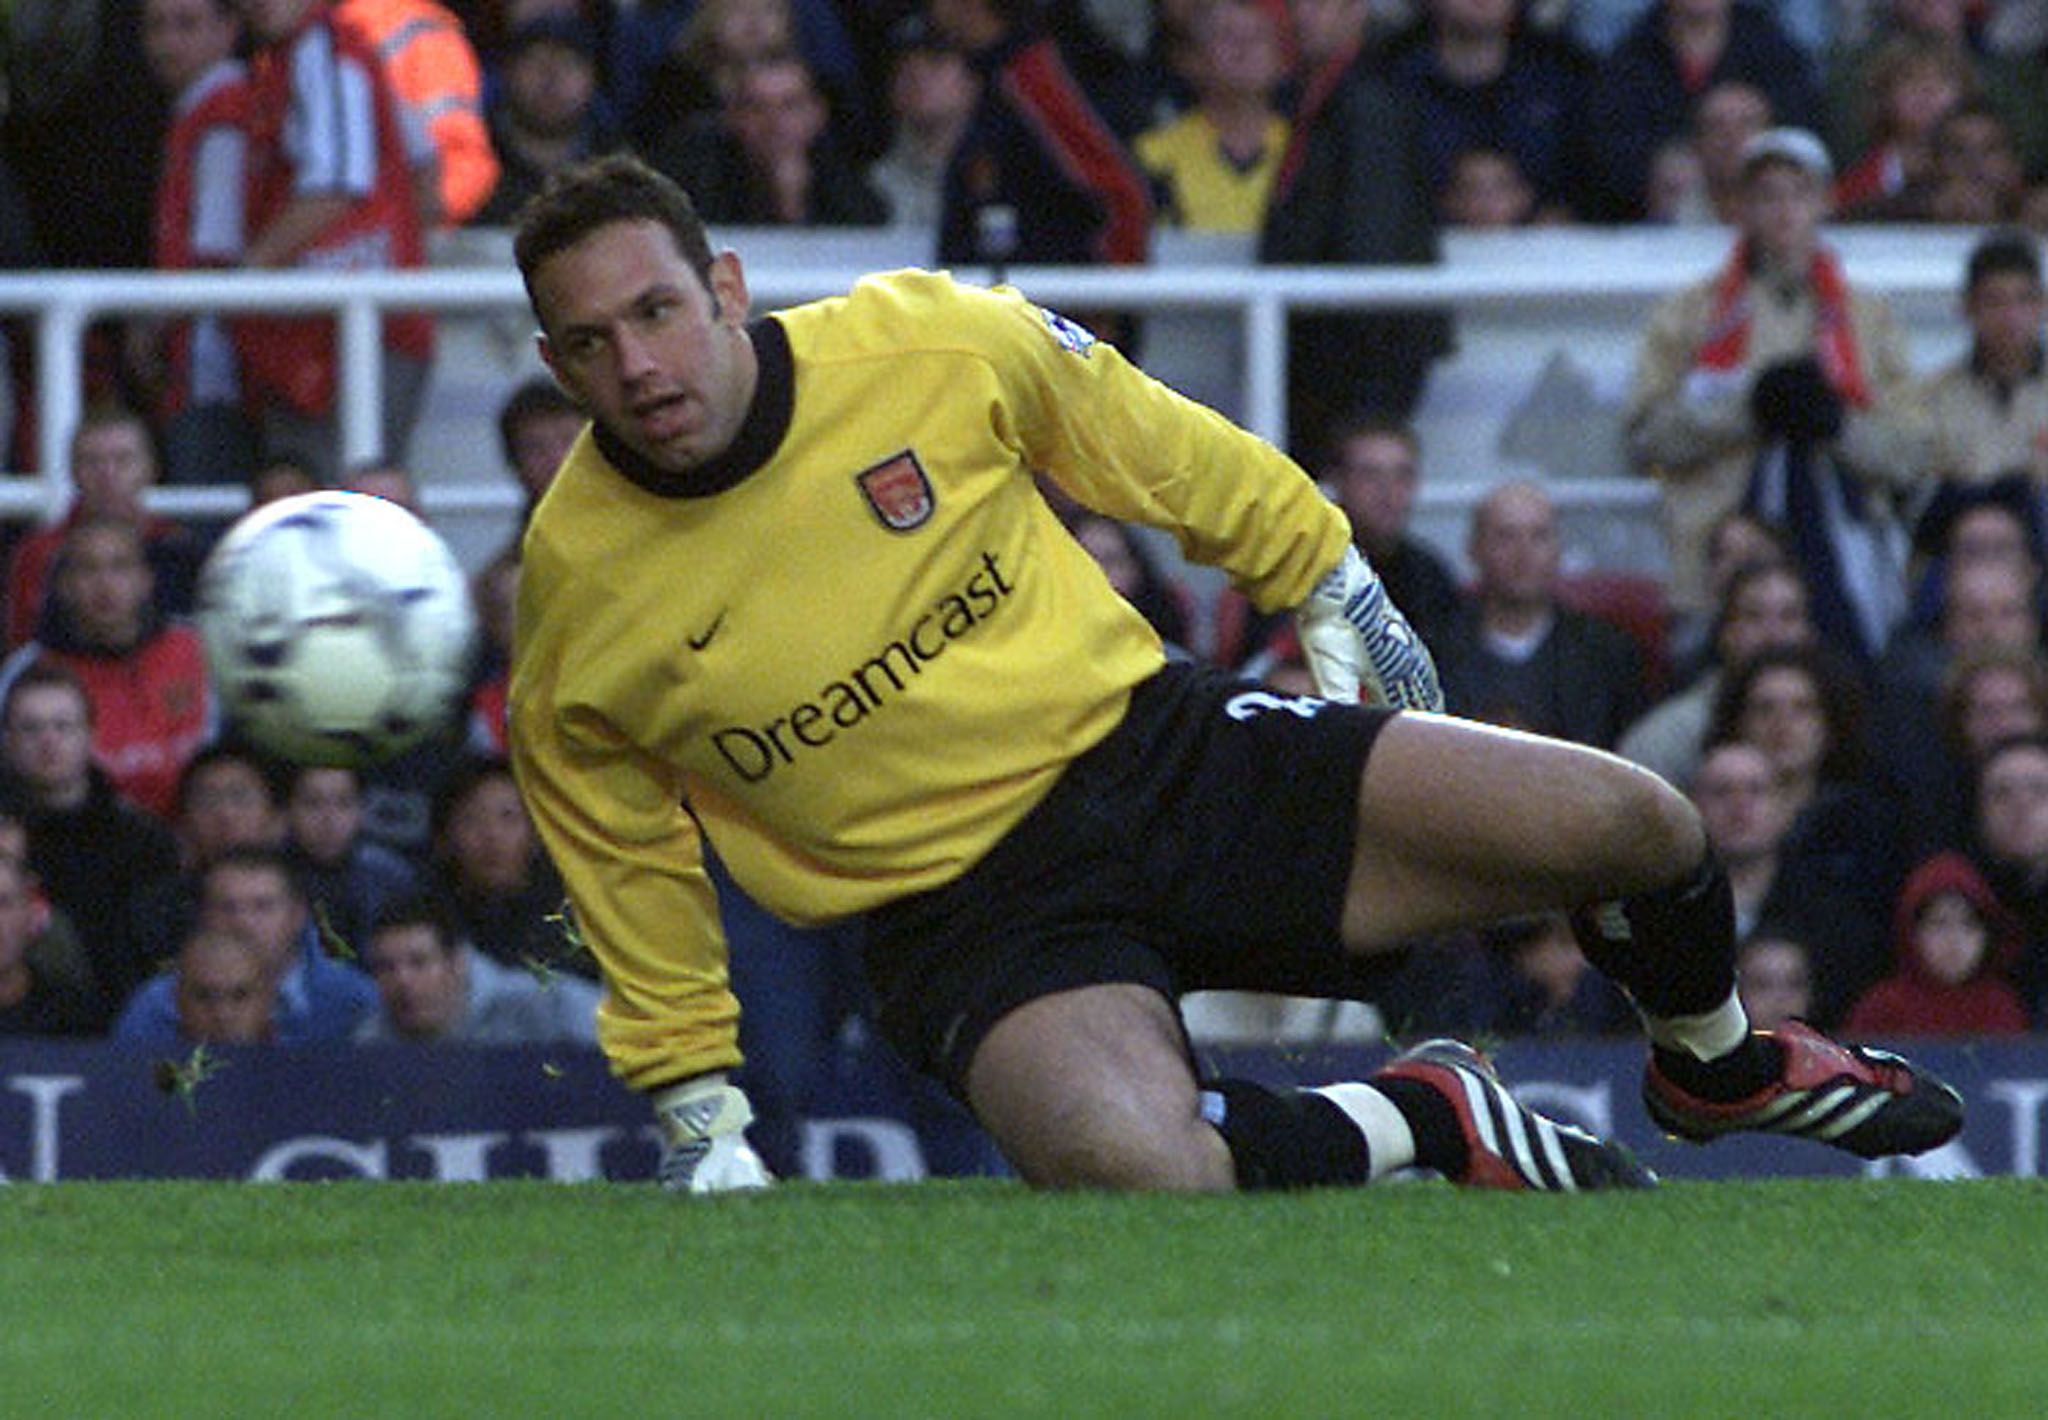 Arsenal's goalkeeper Richard Wright watches the ball bounce past him
during their English Premiere League match against Charlton Athletic at
Highbury November 4, 2001. Arsenal lost the match 4-2. REUTERS/Russell
Boyce "No online/internet usage without FAPL licence. For details see
www.faplweb.com"
RUS/AA